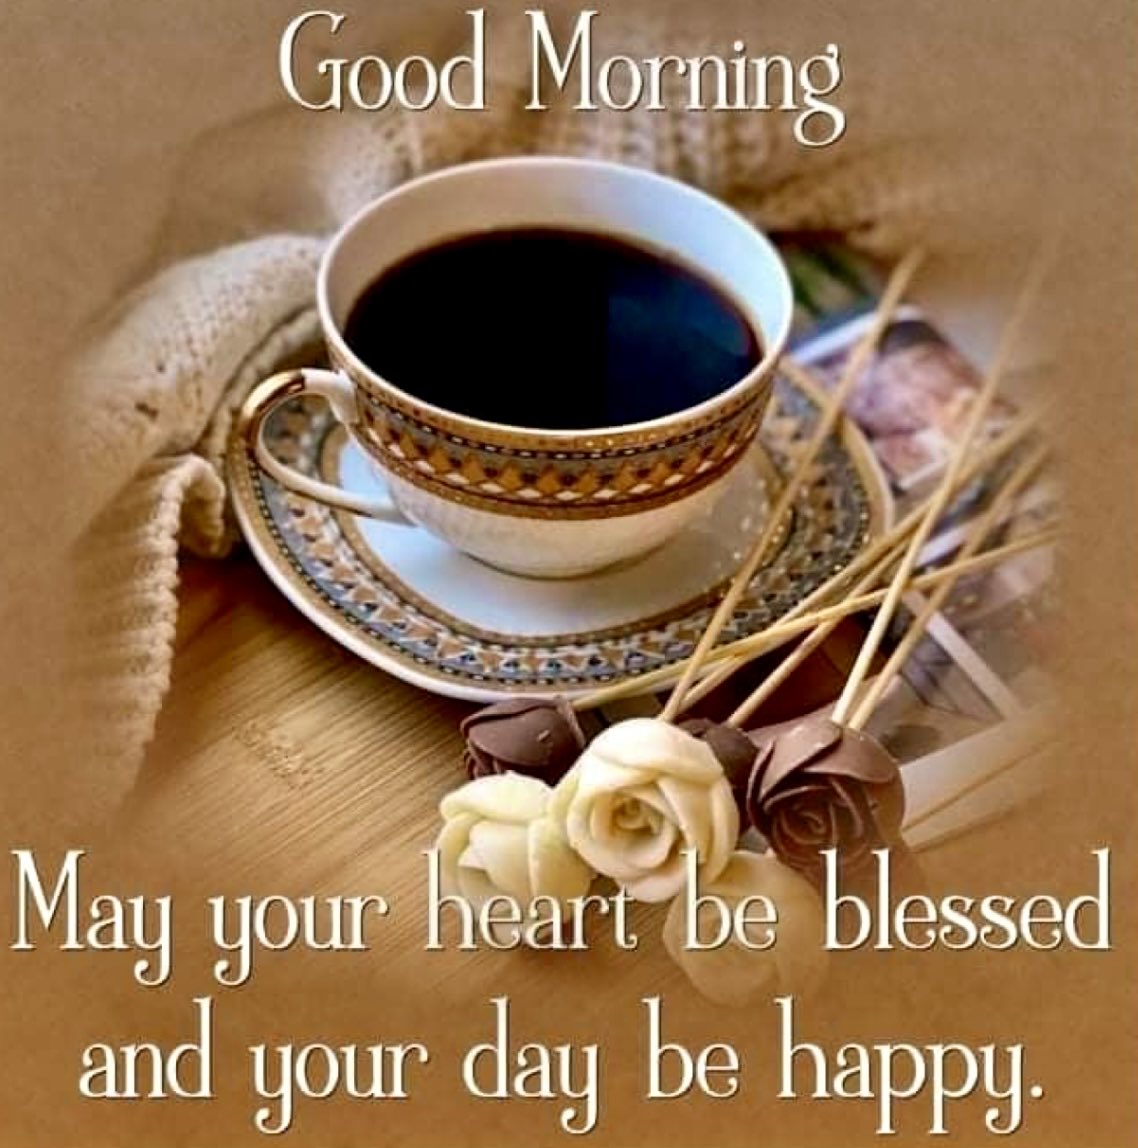 🧡🎉☕️ #GoodMorningX ☕️🎉🧡
#HappySaturday .. Dear God, Please bless this day with love & light. Bless this day with faith & sight. Bless this day with grace & ease. Bless this day with joy, peace & love. 🙏AMEN🙏
#SaturdayMorning #SaturdayBlessing